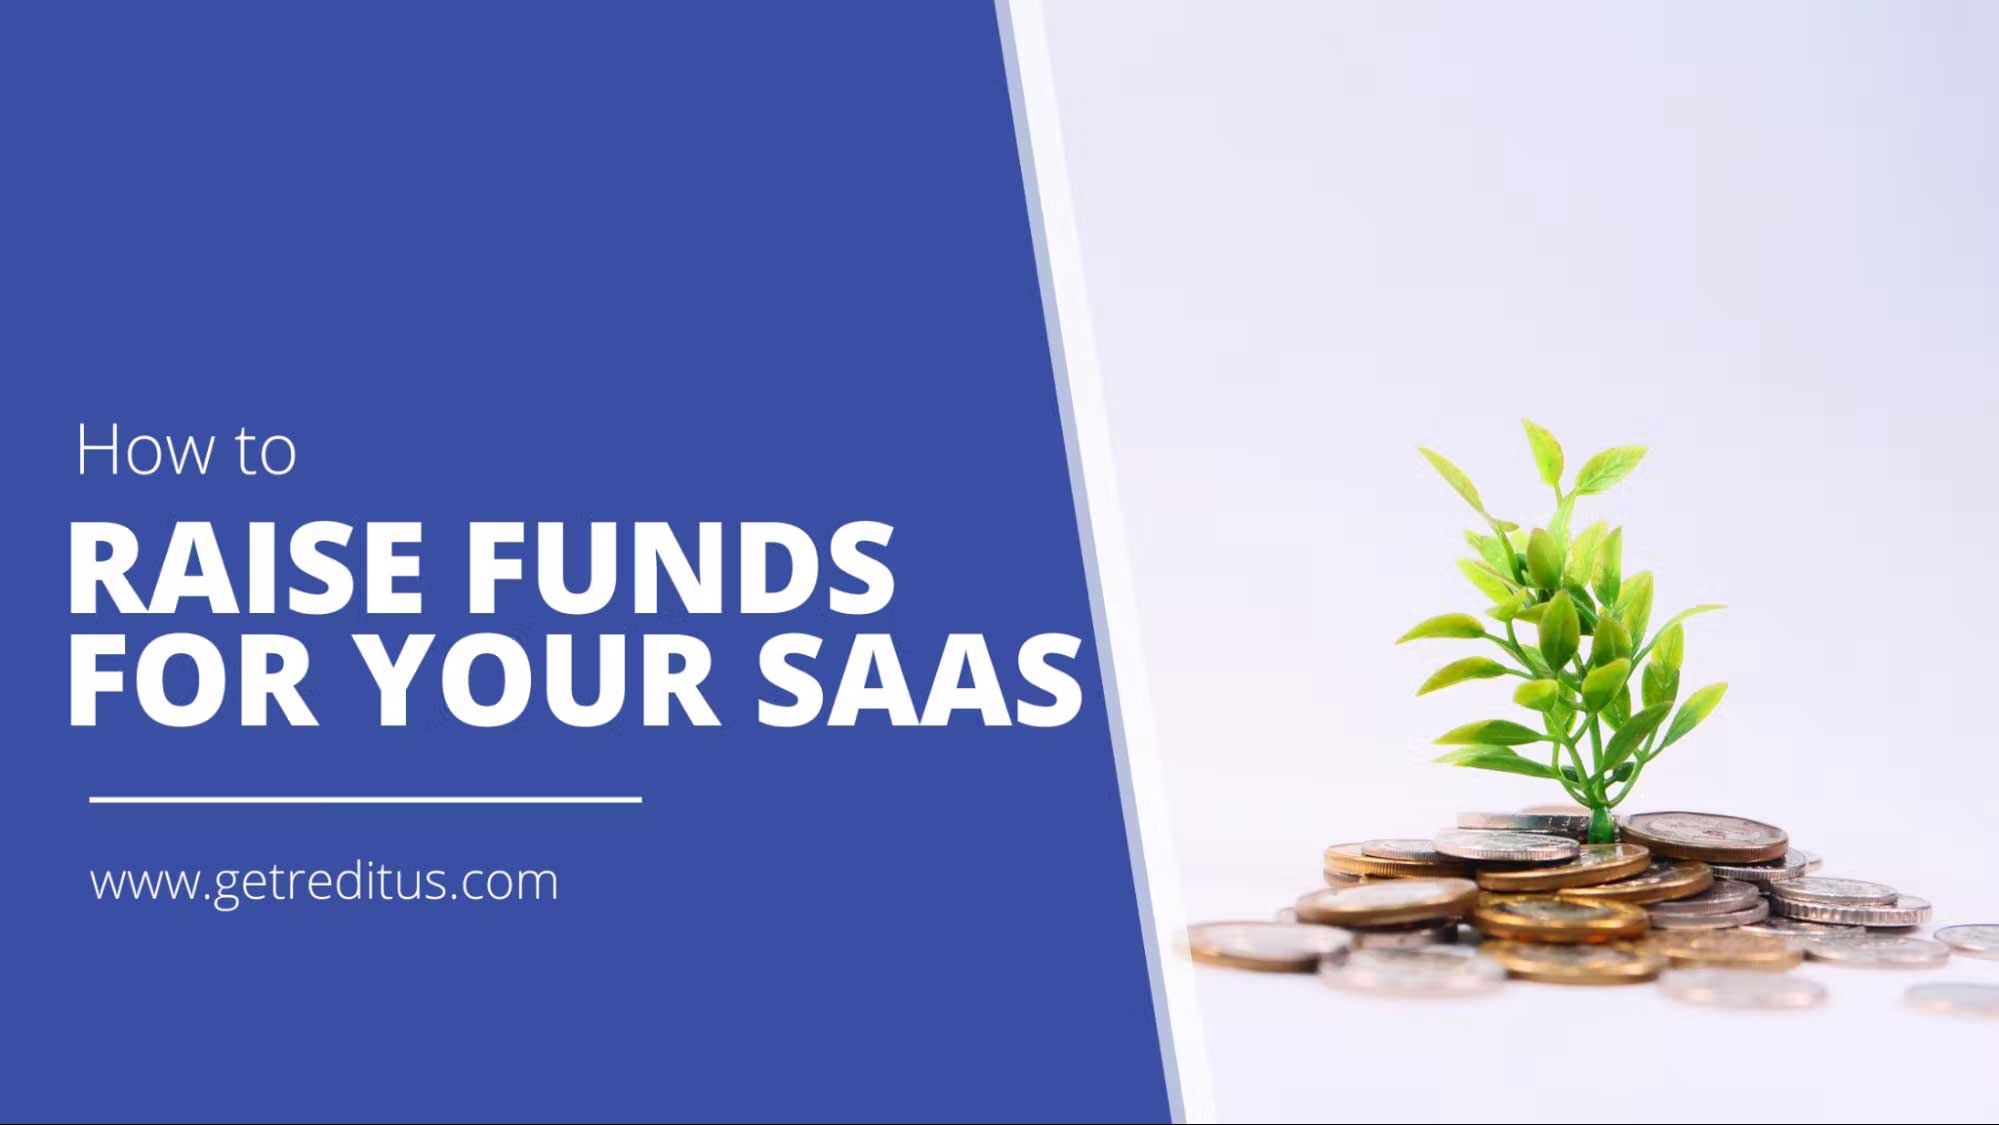 https://www.getreditus.com/blog/how-to-raise-funds-for-your-saas/